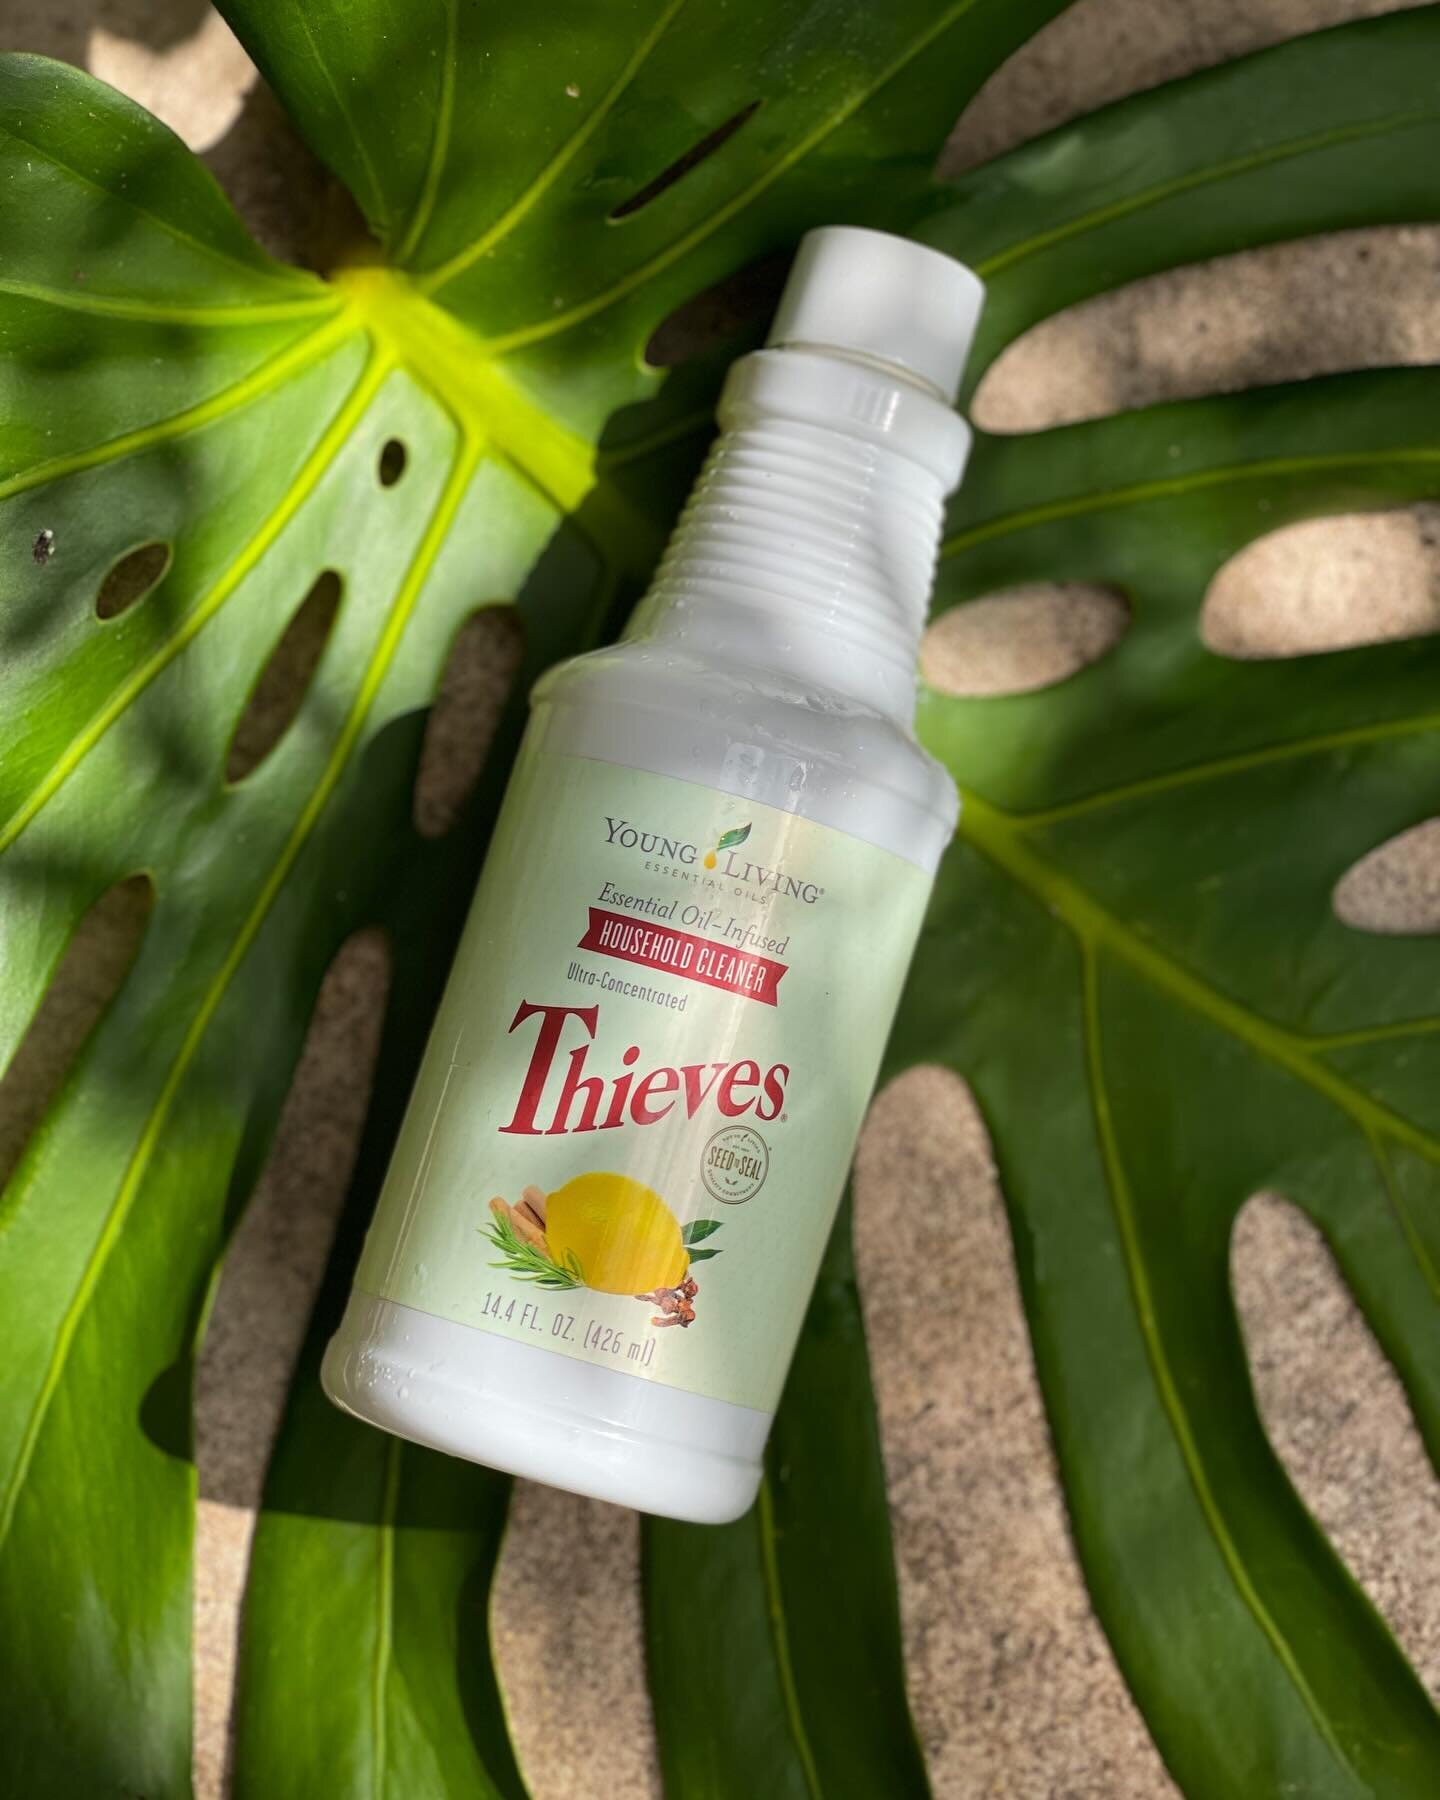 Our #1 product we LOVE is Thieves! 

We love it because you can use it for anything and everything from cleaning countertops, showers, or even getting streak free mirrors. Best part? There are NO toxic chemicals in it. This is a plant-based formula c